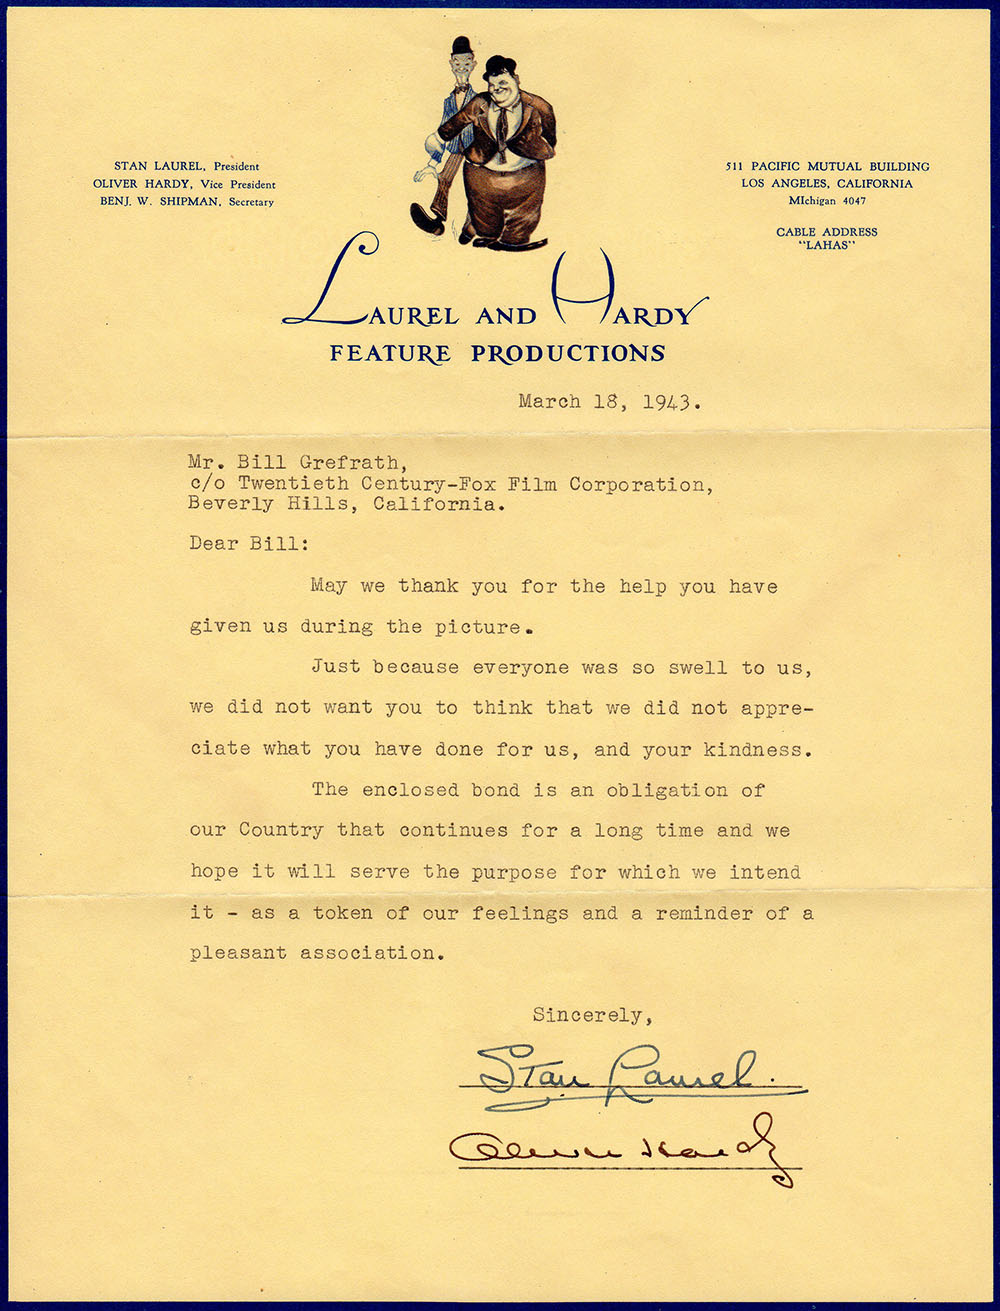 Rare Letter from both Stan Laurel & Oliver Hardy to Bill Grefrath